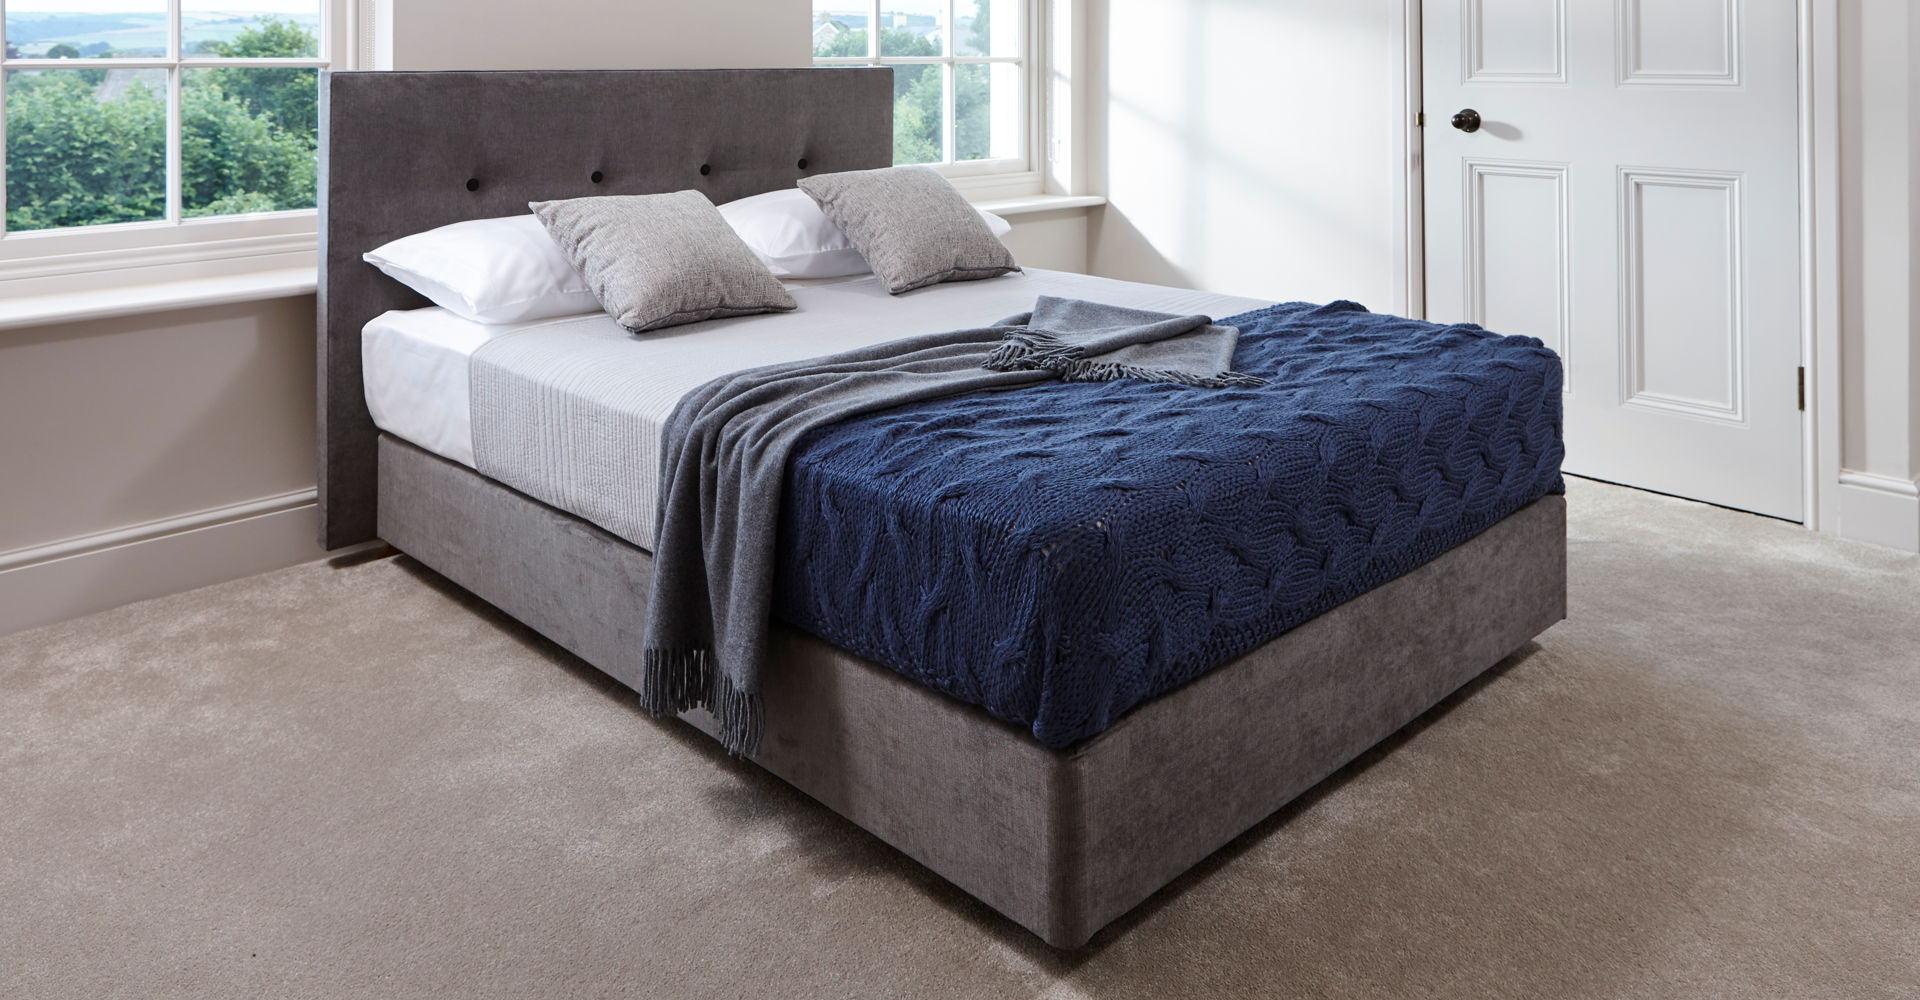 Essentials Graphite Upholstered Divan Bed With Headboard by Gillmore © GillmoreSPACE Ltd